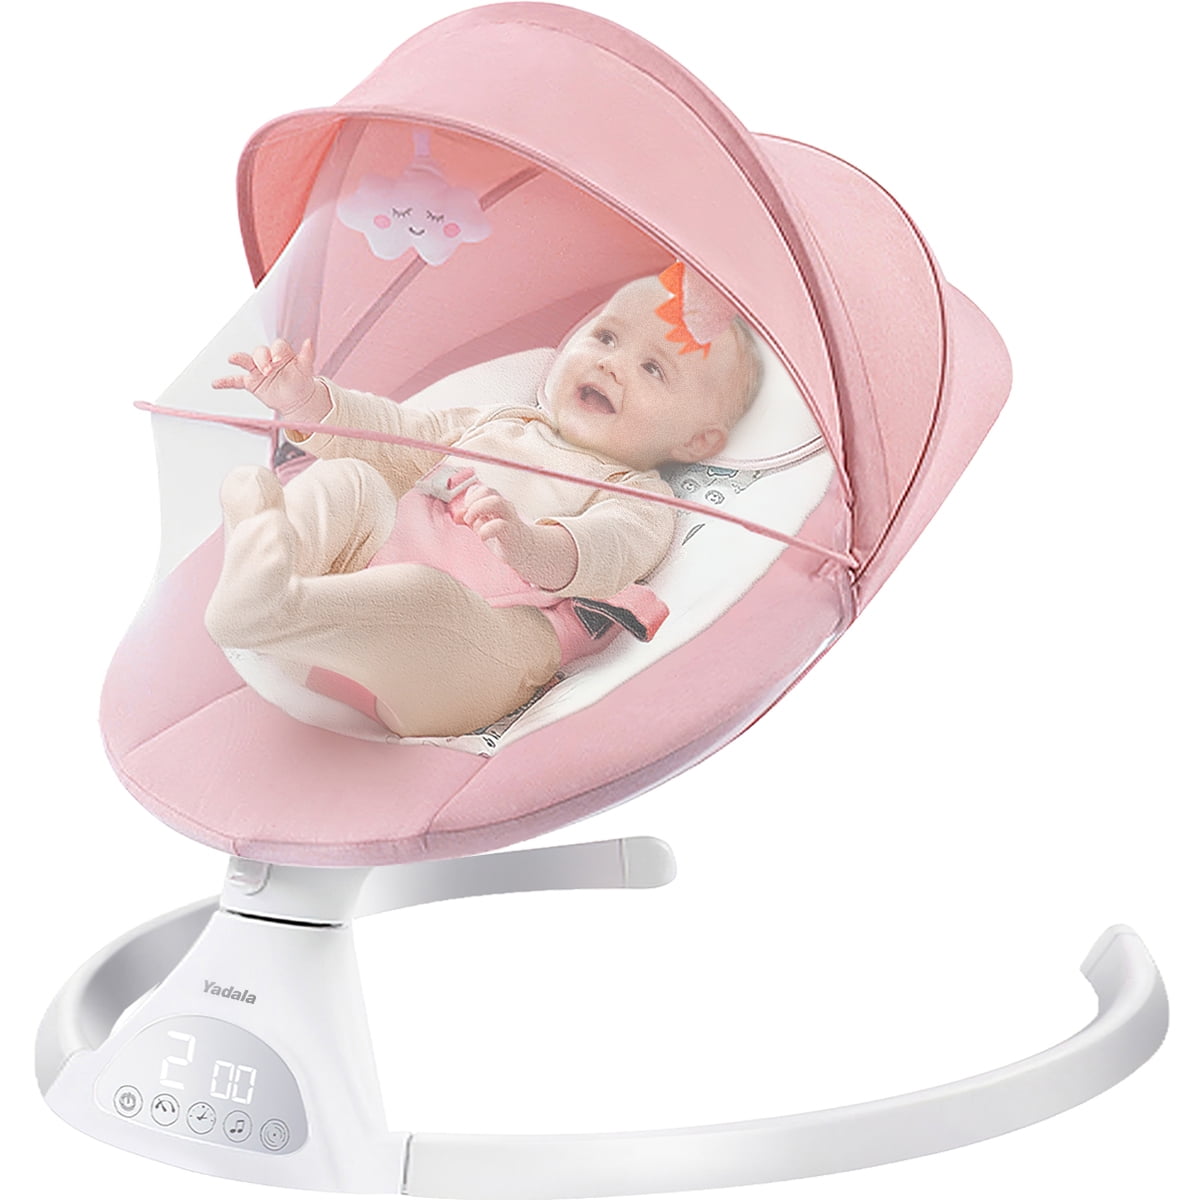 How to Choose a Baby Bounce, Swing or Rocker